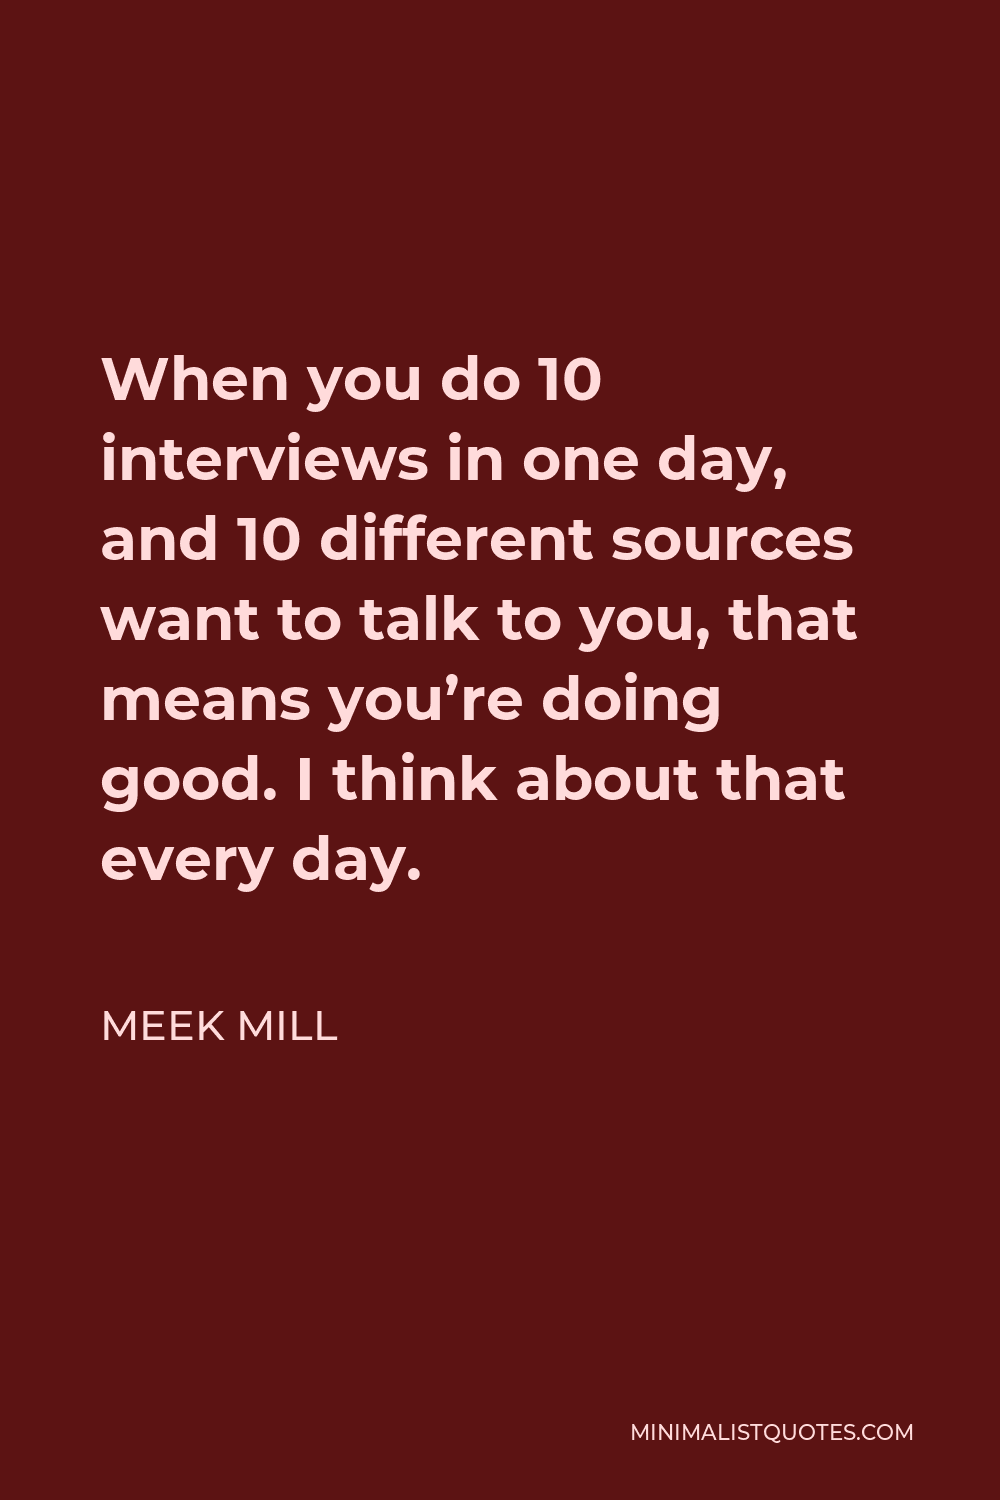 Meek Mill Quote - When you do 10 interviews in one day, and 10 different sources want to talk to you, that means you’re doing good. I think about that every day.